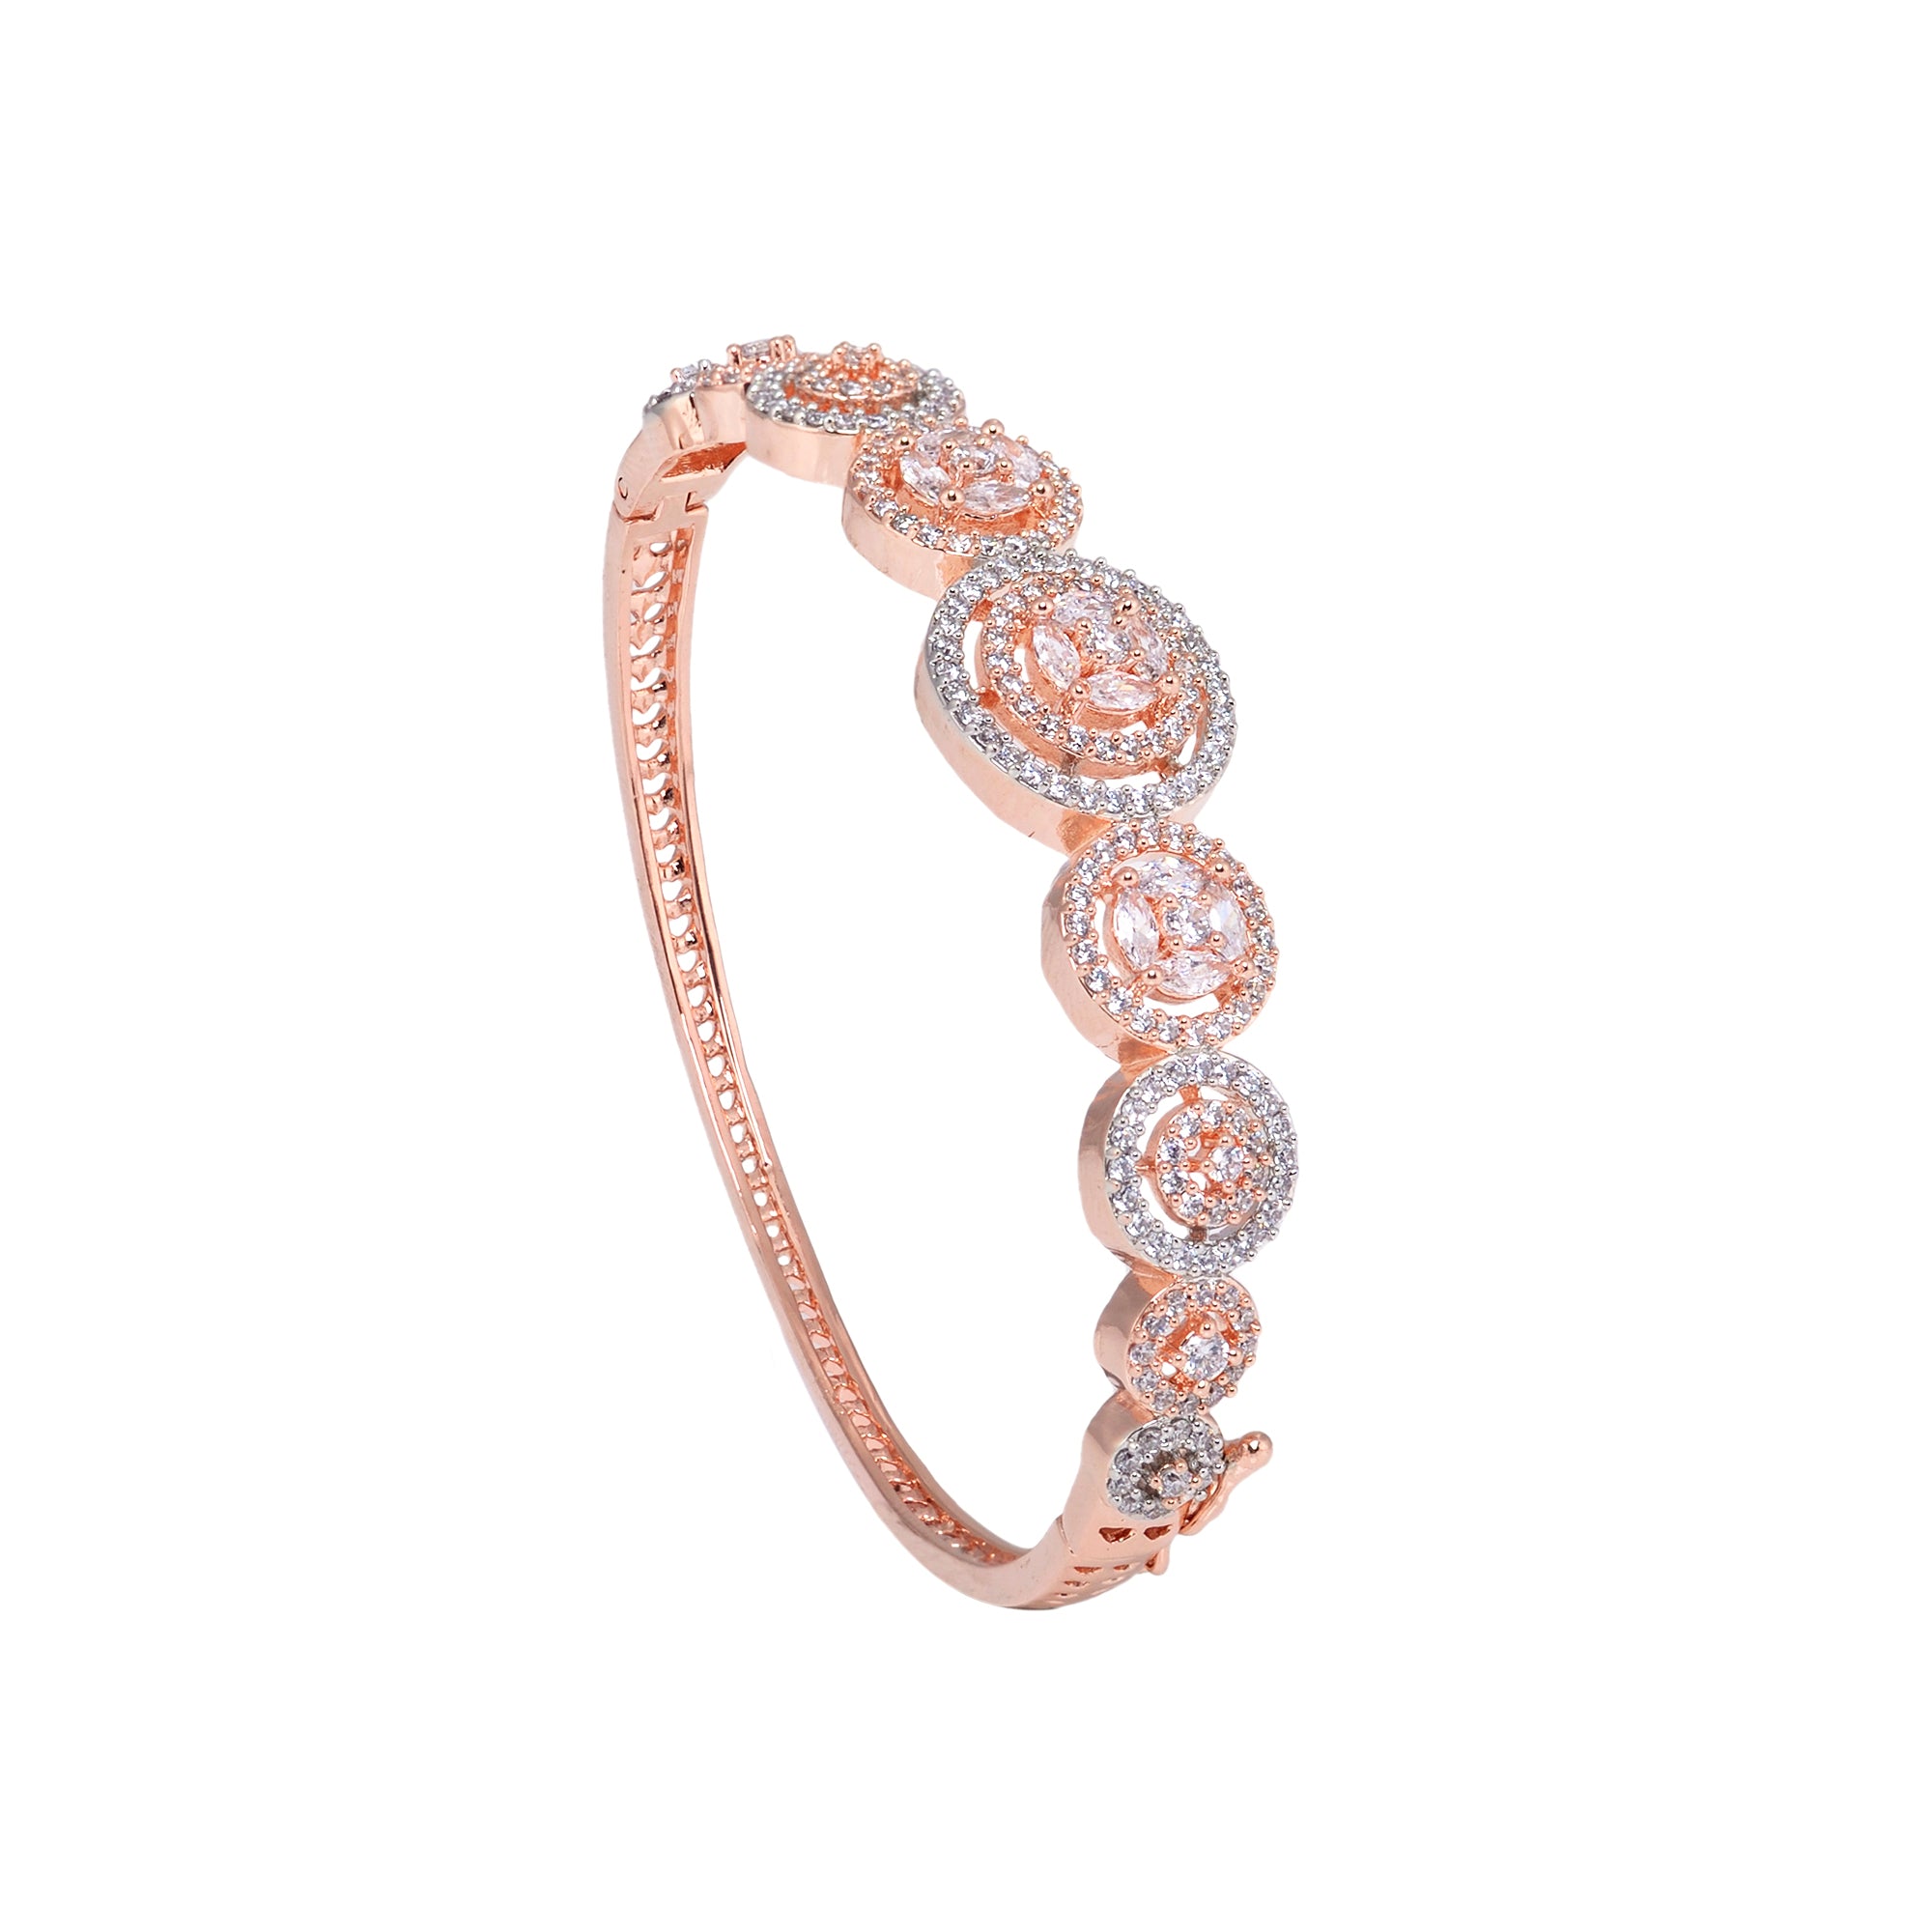 Diamond Encrusted Handcrafted Bracelet, Rose Gold Plated For Women And Girls - Saraf Rs Jewellery